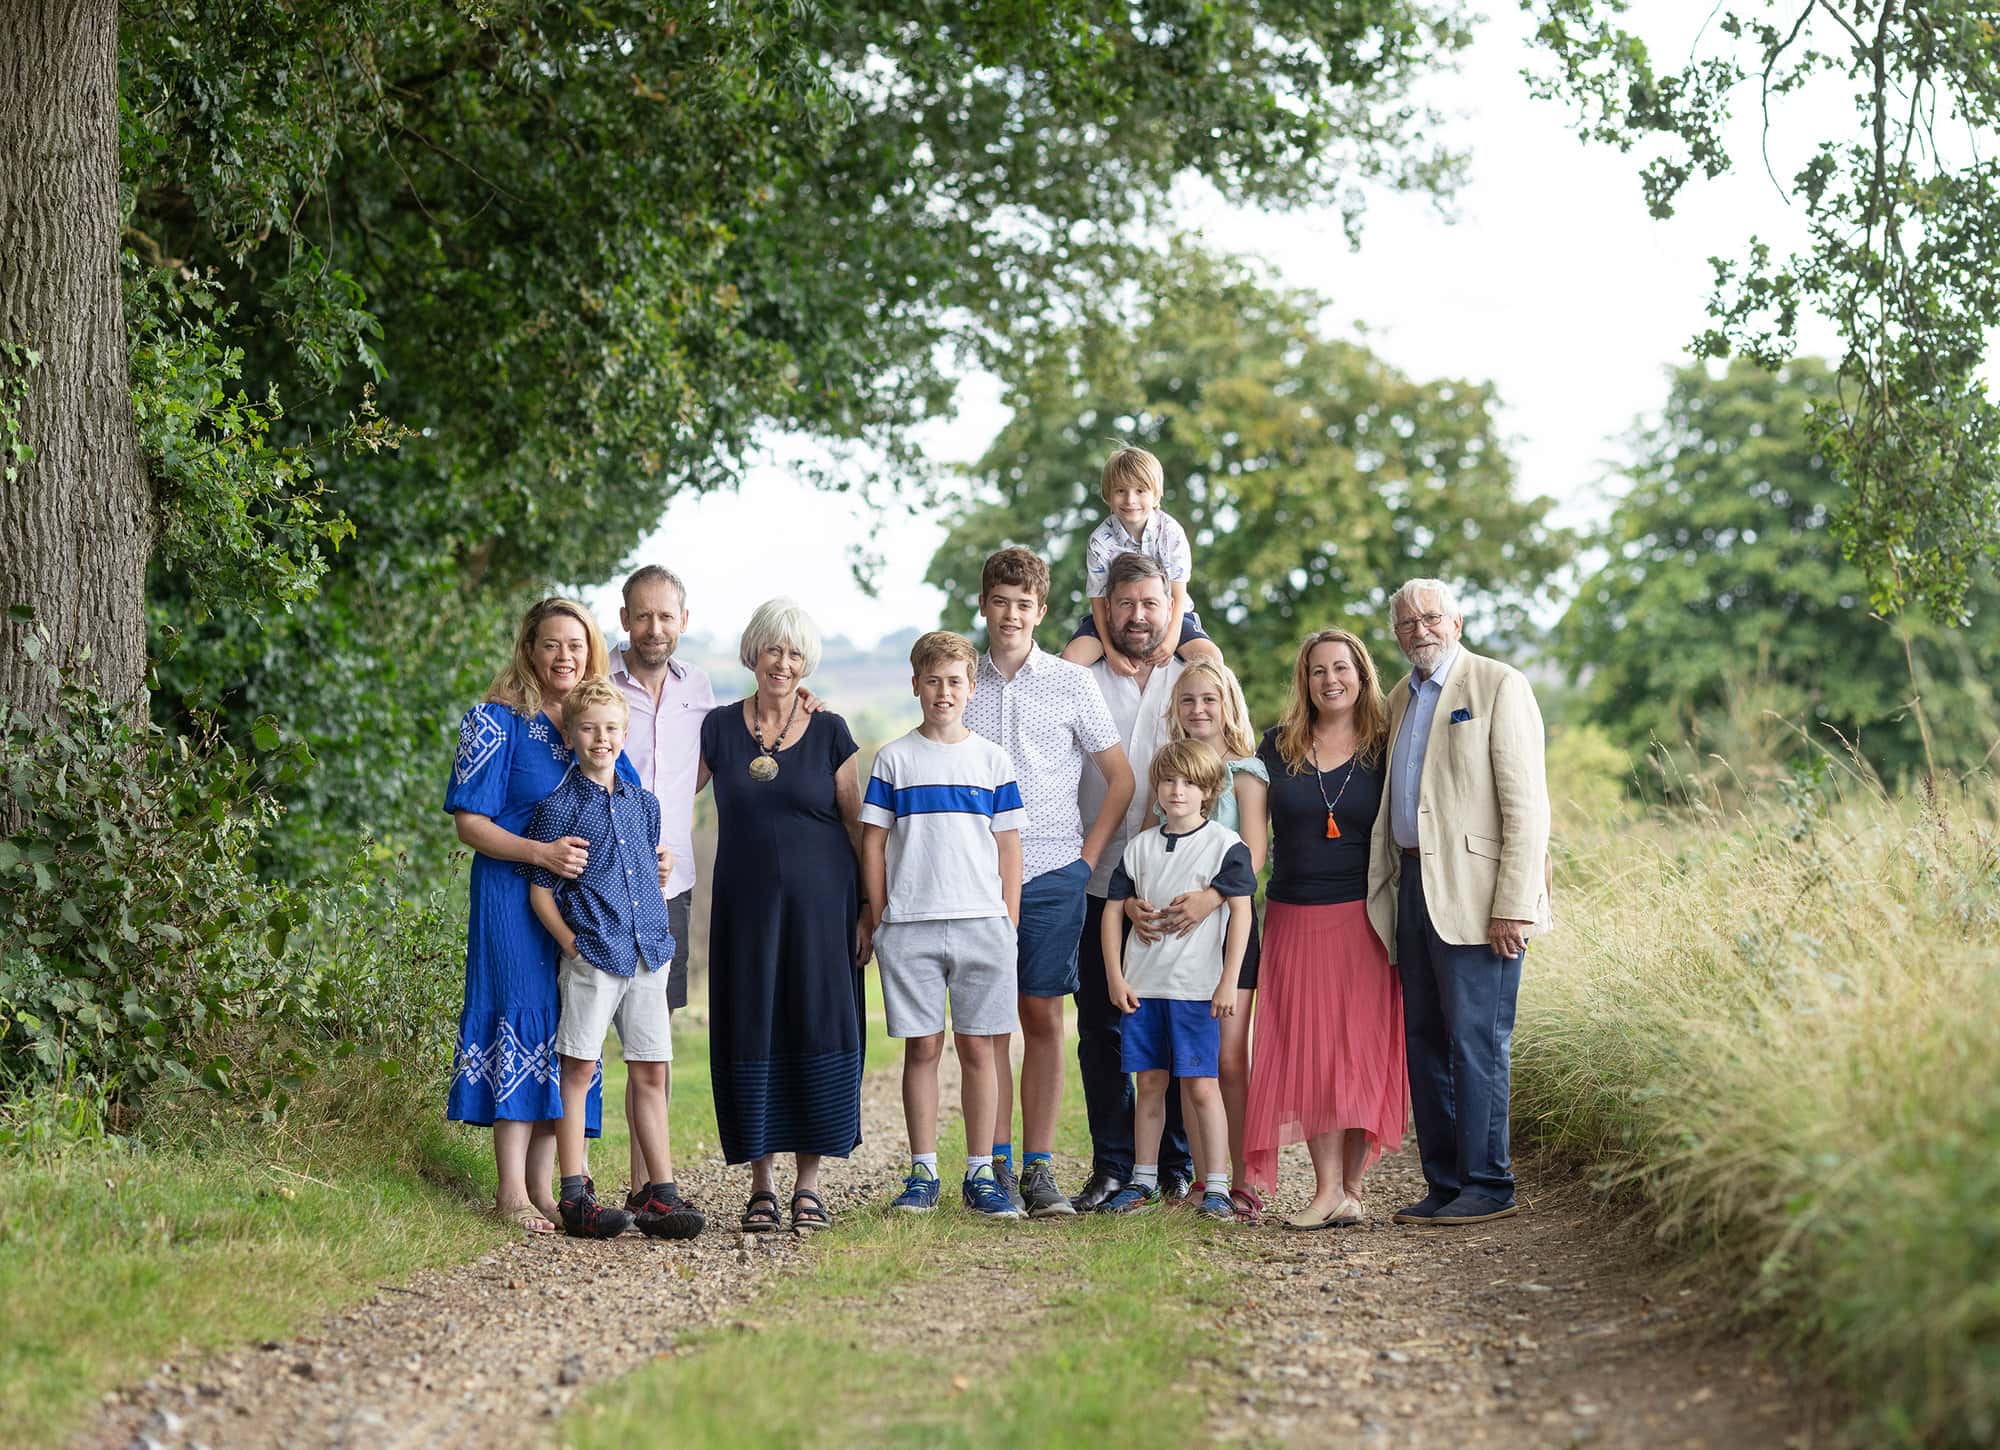 Extended Family photograph taken during an outdoor photoshoot with Alison McKenny Photography